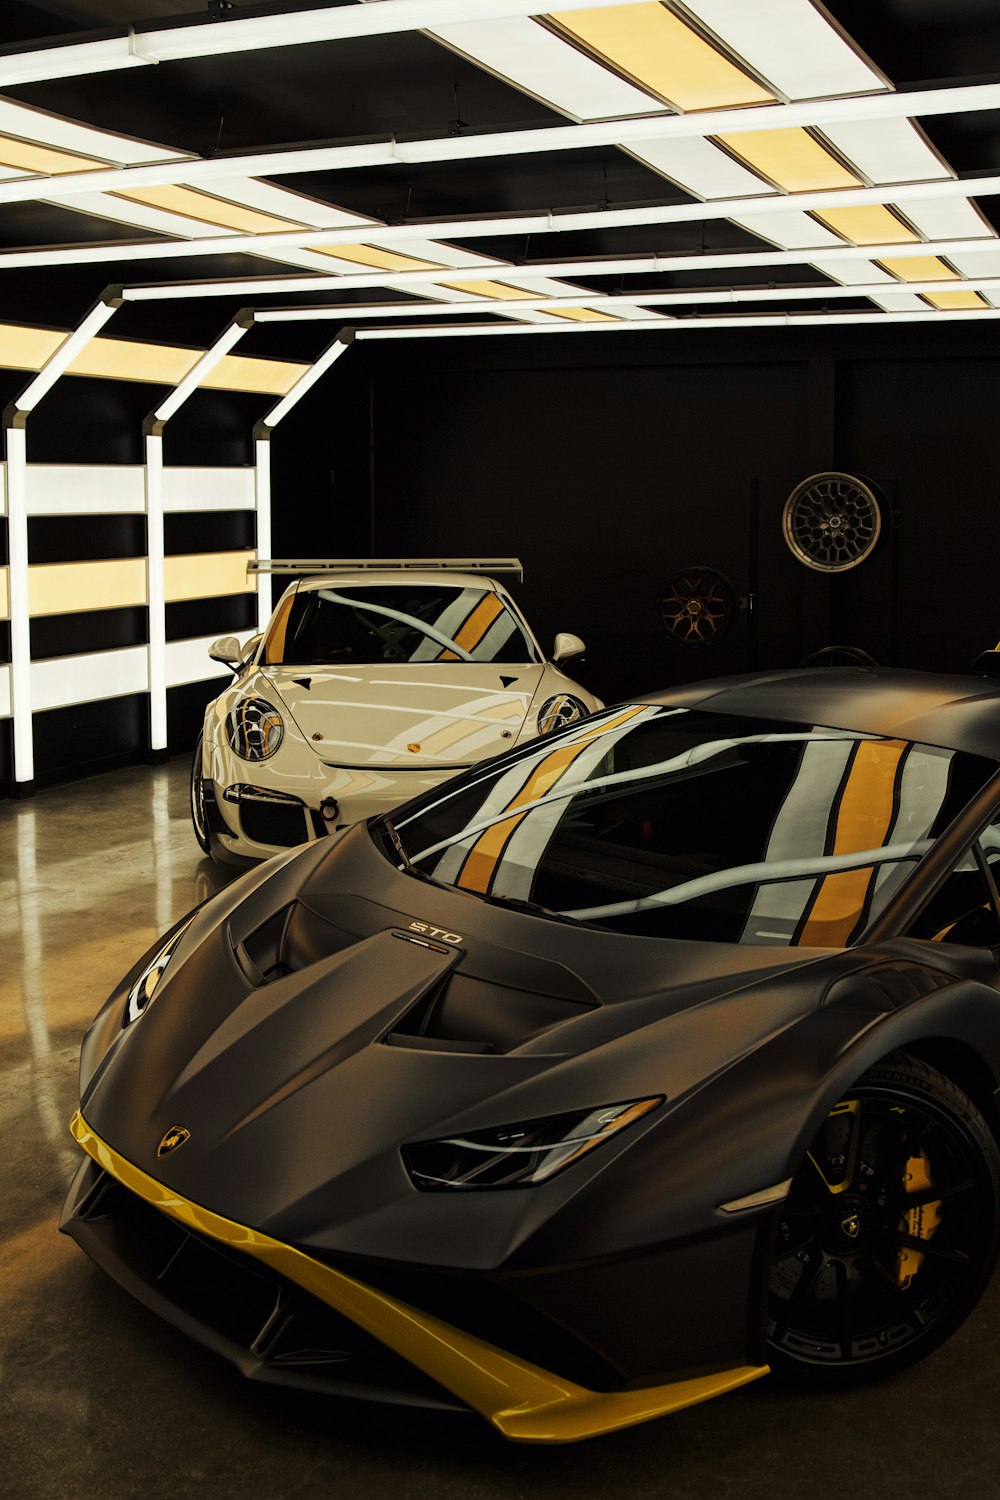 a black and yellow sports car in a garage